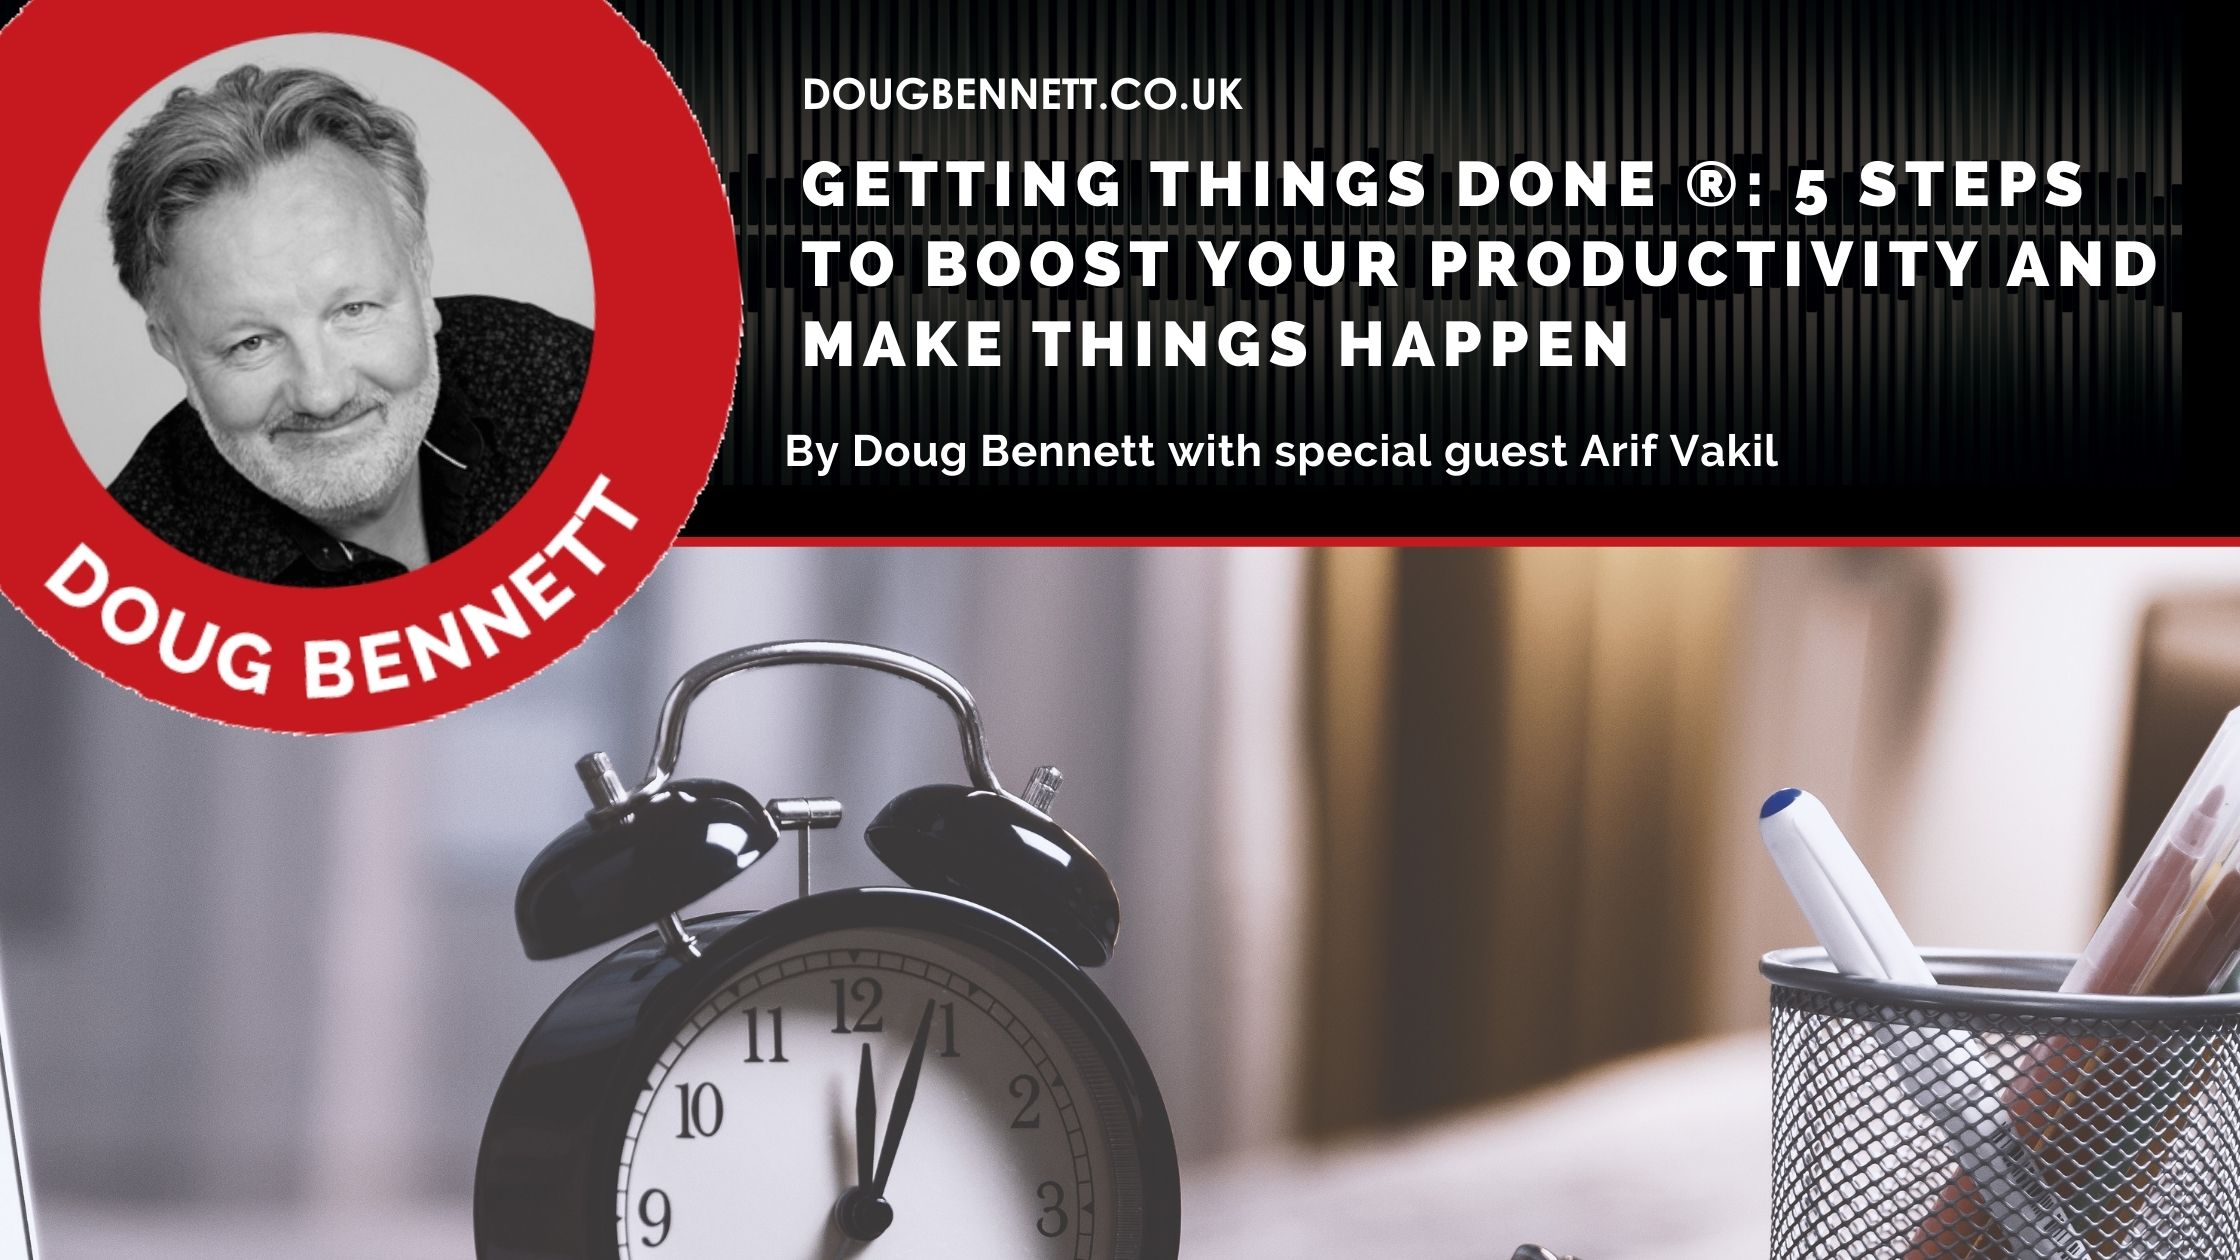 What does Getting Things Done® actually mean? In this blog, we break down David Allen’s personal productivity system.